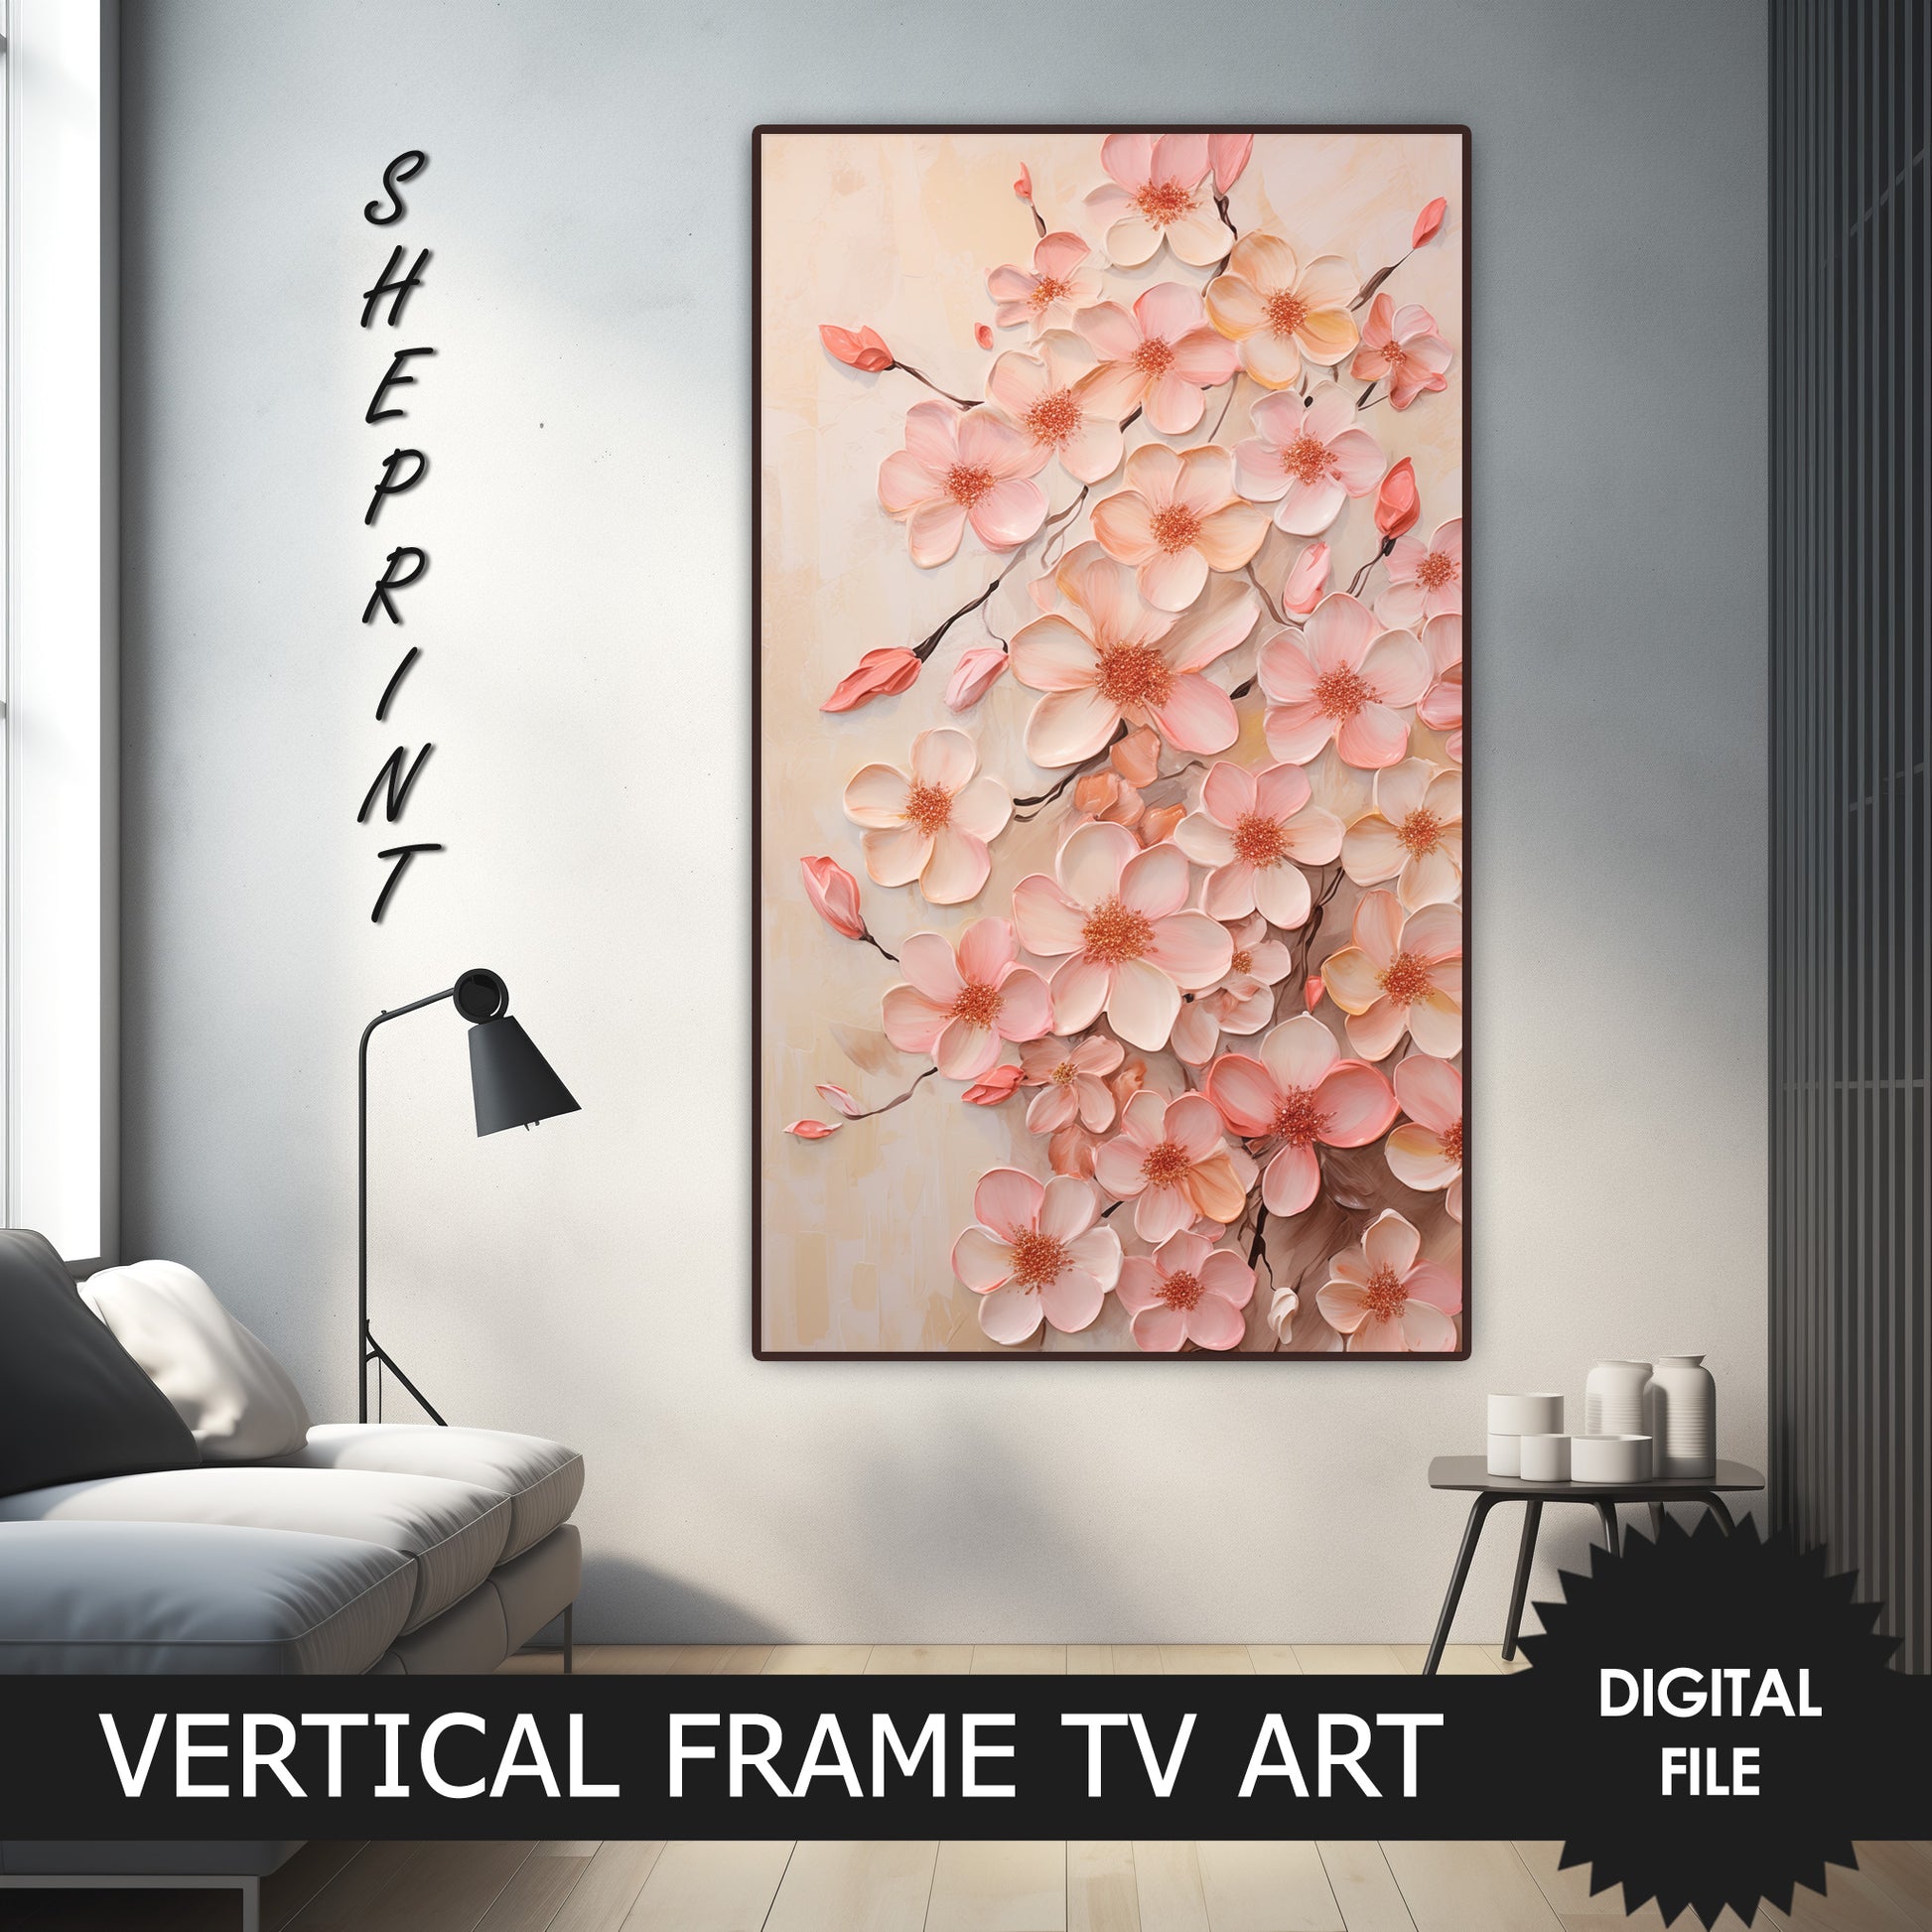 Vertical Frame TV Art, Peach Fuzz Flowers Painting preview on Samsung Frame TV when mounted vertically